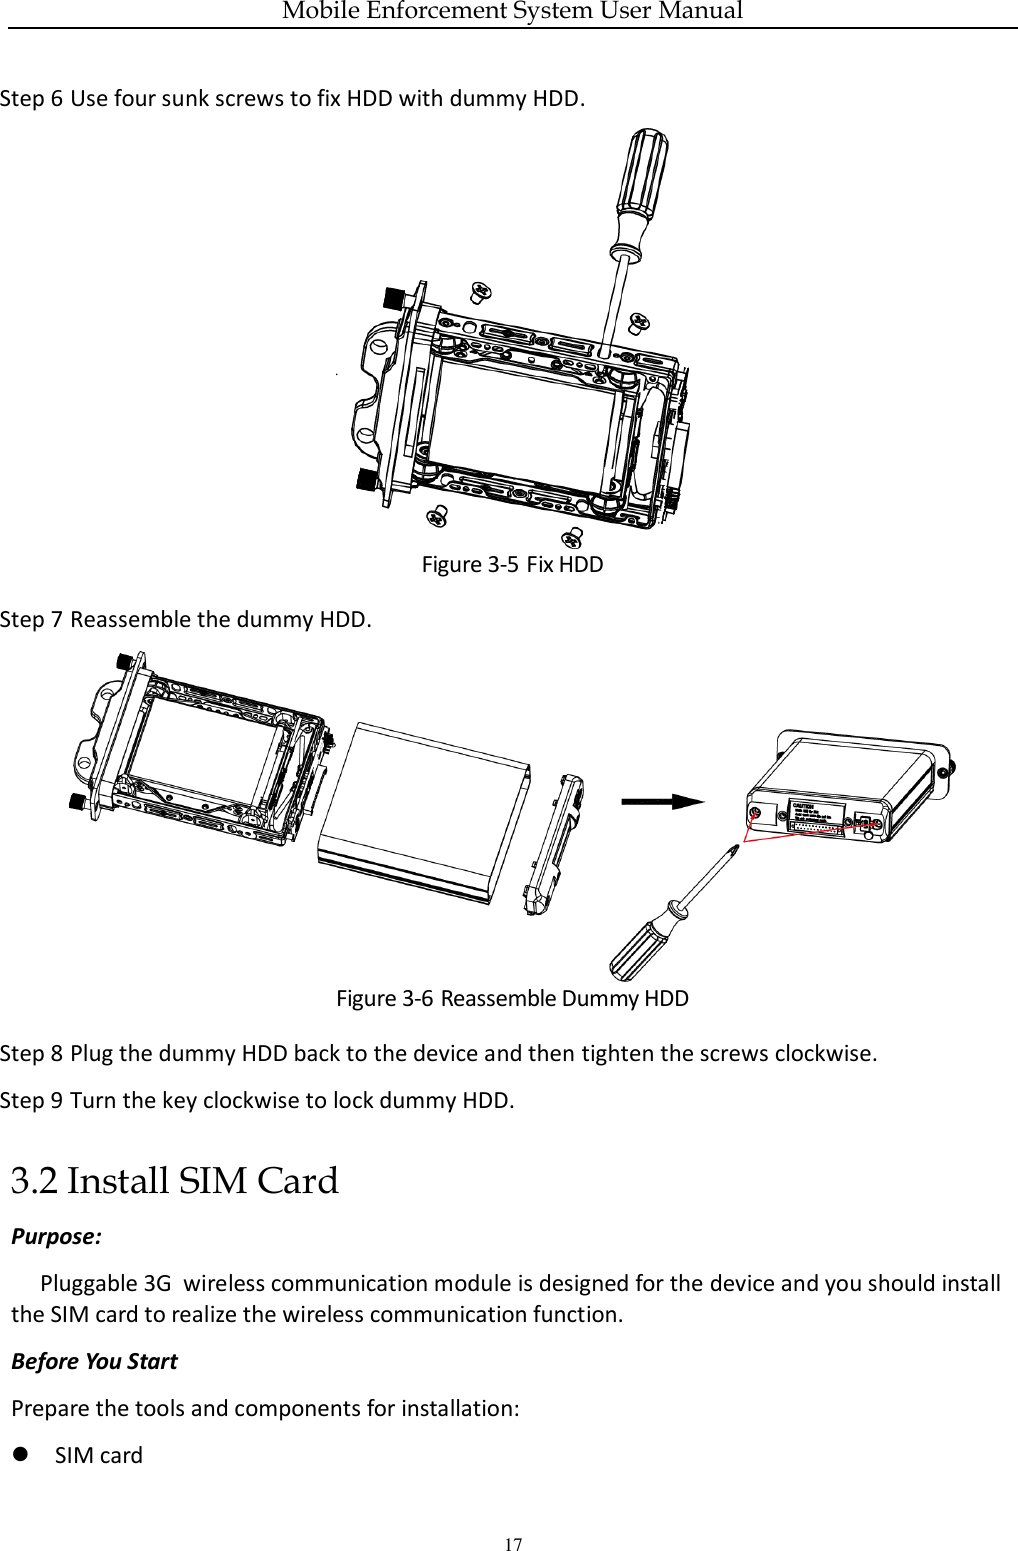 Mobile Enforcement System User Manual 17 Step 6 Use four sunk screws to fix HDD with dummy HDD.  Figure 3-5 Fix HDD Step 7 Reassemble the dummy HDD.  Figure 3-6 Reassemble Dummy HDD Step 8 Plug the dummy HDD back to the device and then tighten the screws clockwise. Step 9 Turn the key clockwise to lock dummy HDD. 3.2 Install SIM Card Purpose: Pluggable 3G  wireless communication module is designed for the device and you should install the SIM card to realize the wireless communication function. Before You Start Prepare the tools and components for installation:    SIM card 